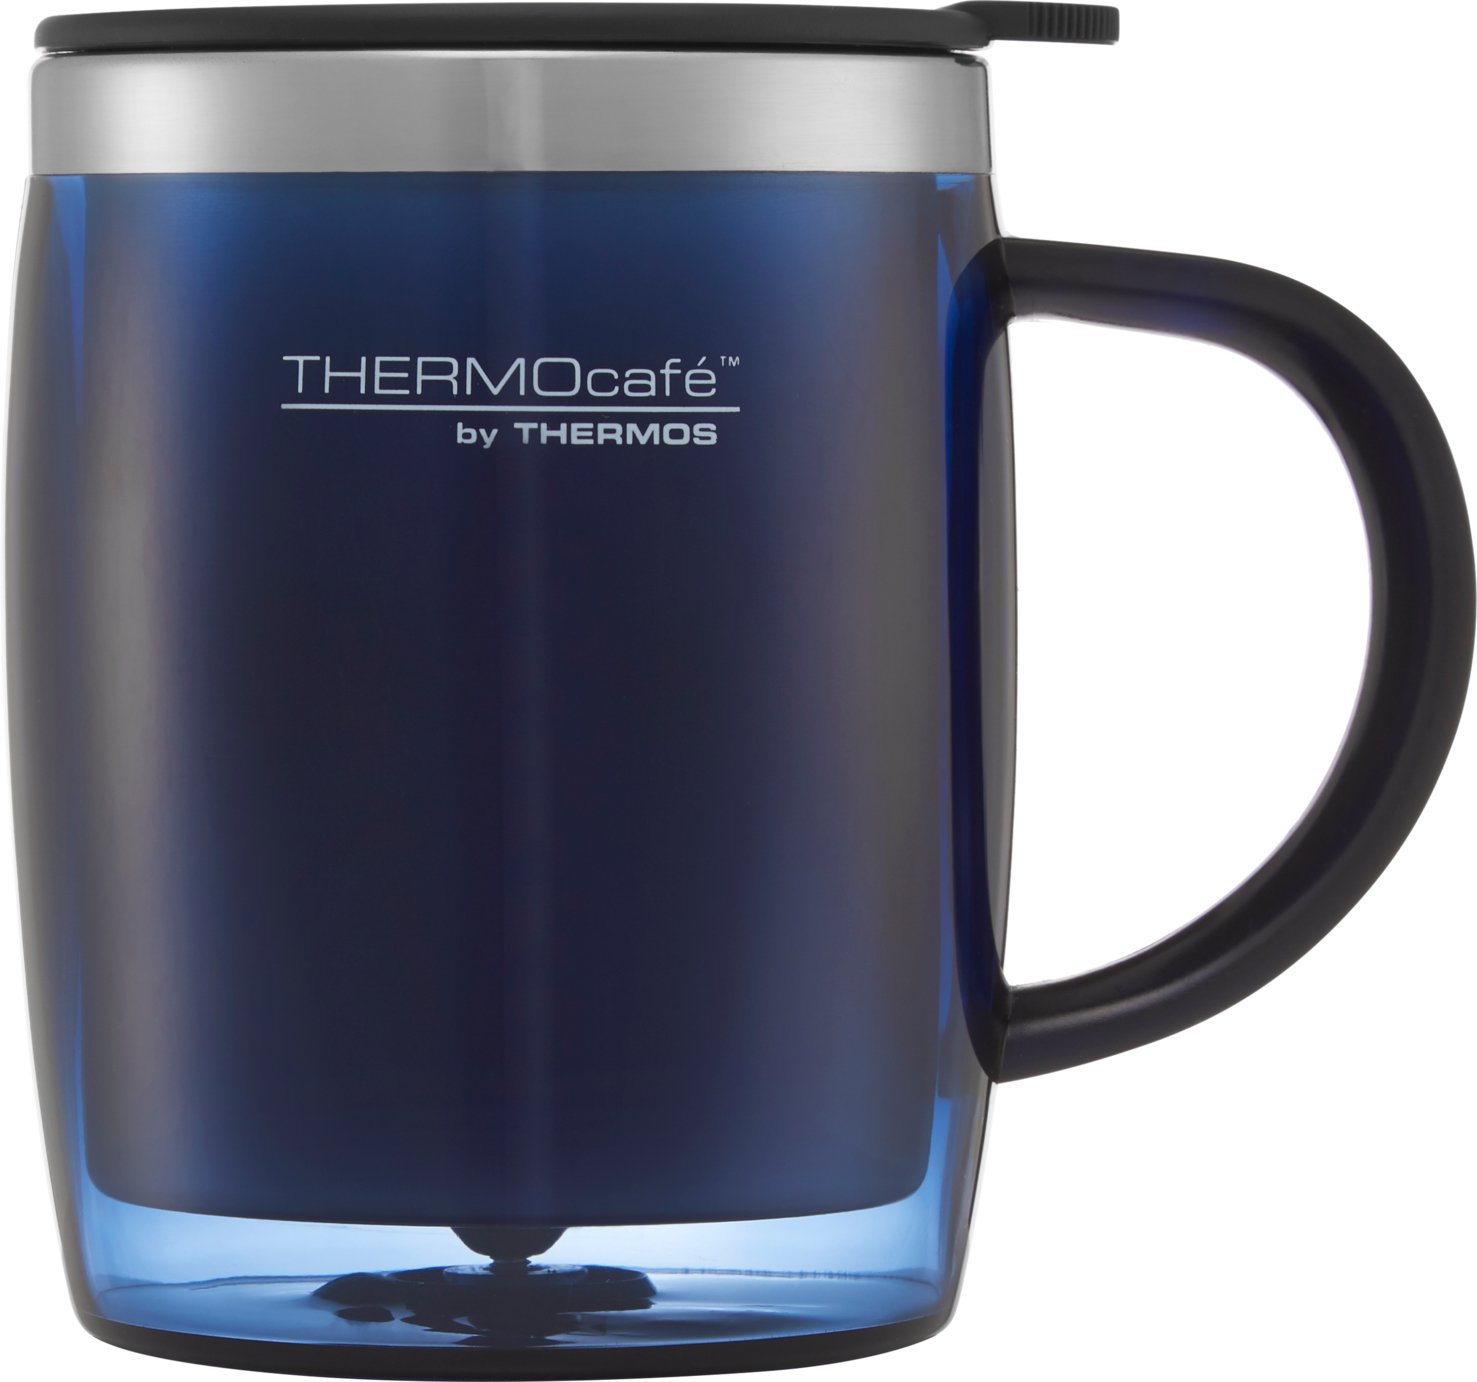 Thermocafe Pack of 2 Desk Mugs - Midnight Blue